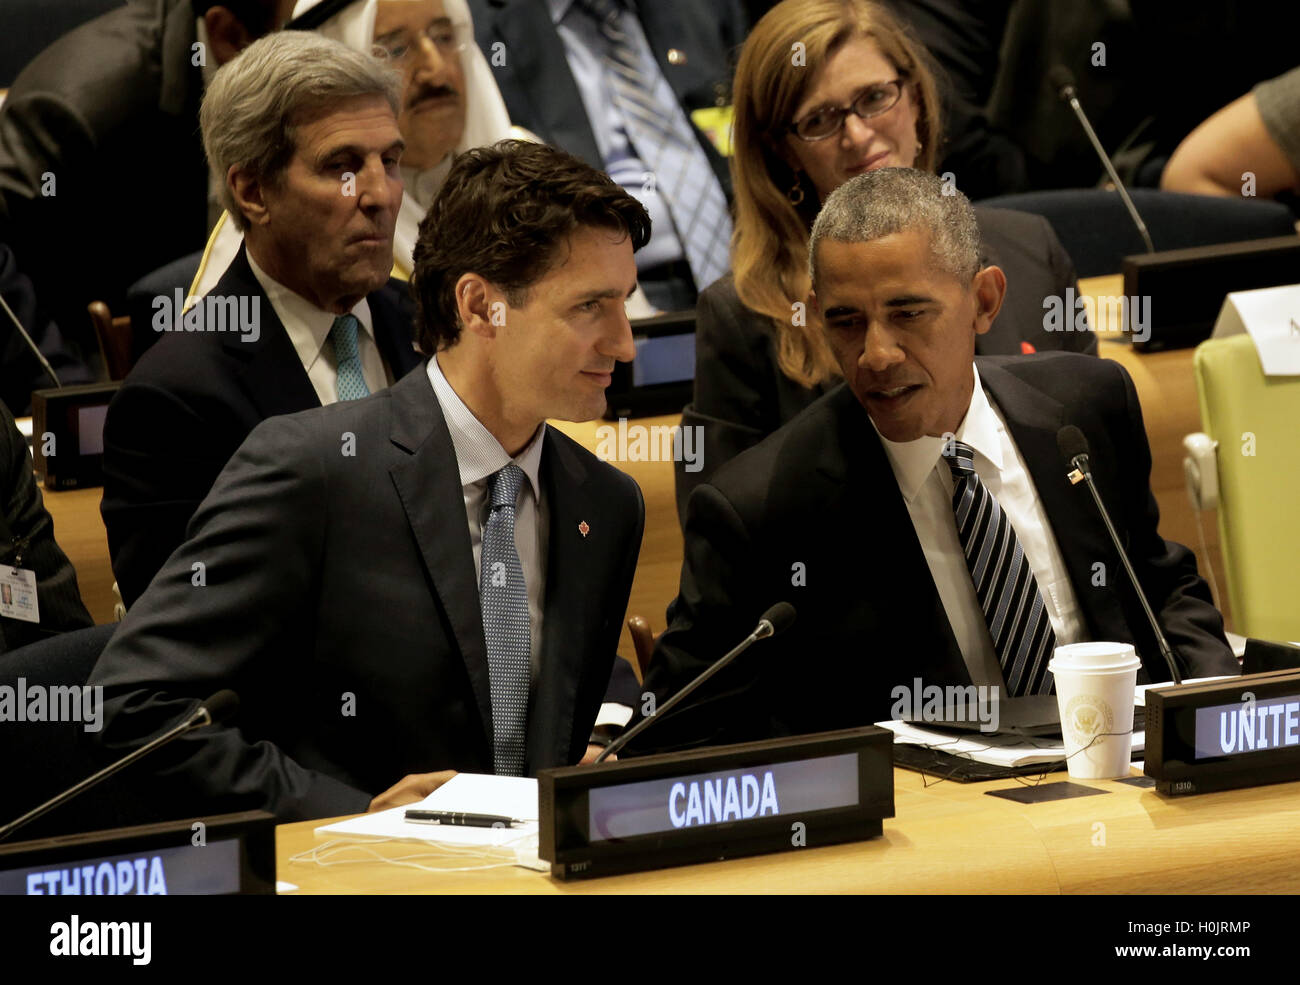 United States President Barack Obama (R) speaks with Canada's Prime Minister Justin Trudeau at a Leaders Summit for Refugees during the United Nations 71st session of the General Debate at the United Nations General Assembly at United Nations headquarters in New York, New York, USA, 20 September 2016. Credit: Peter Foley / Pool via CNP /MediaPunch Stock Photo